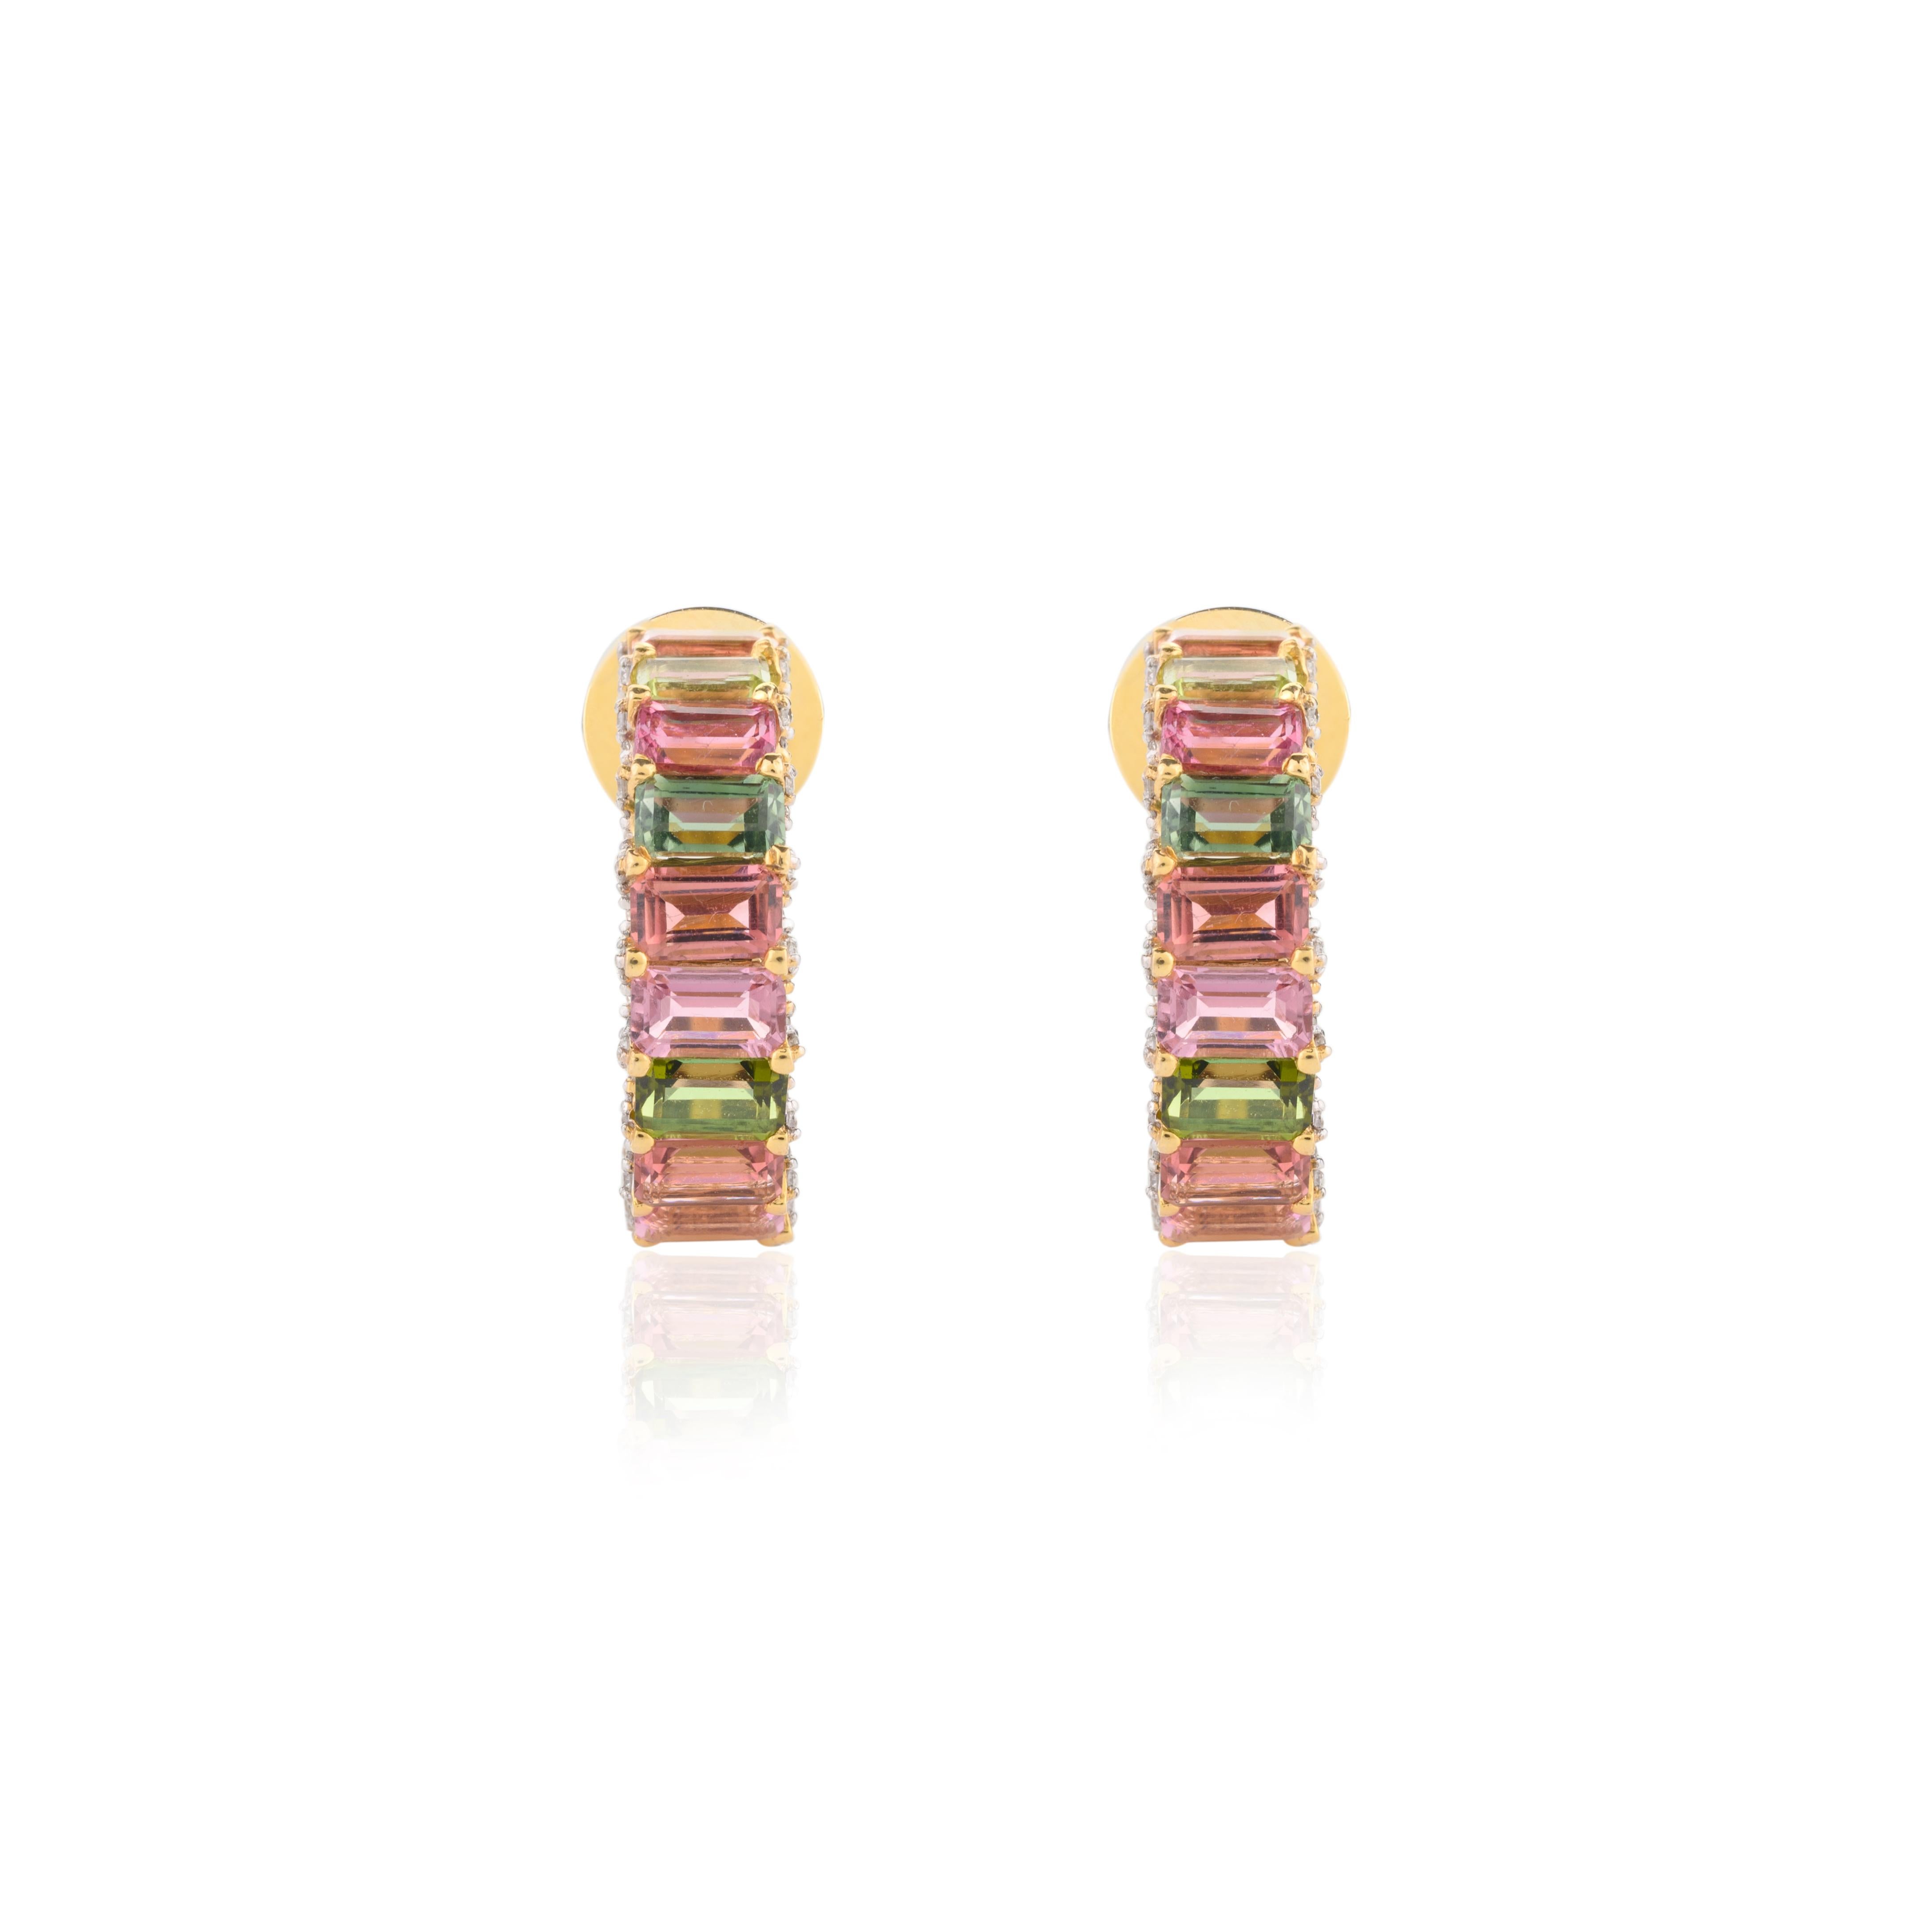 Modernist One-of-a-Kind Baguette Tourmaline and Diamond C-Hoop Earrings 14k Yellow Gold For Sale